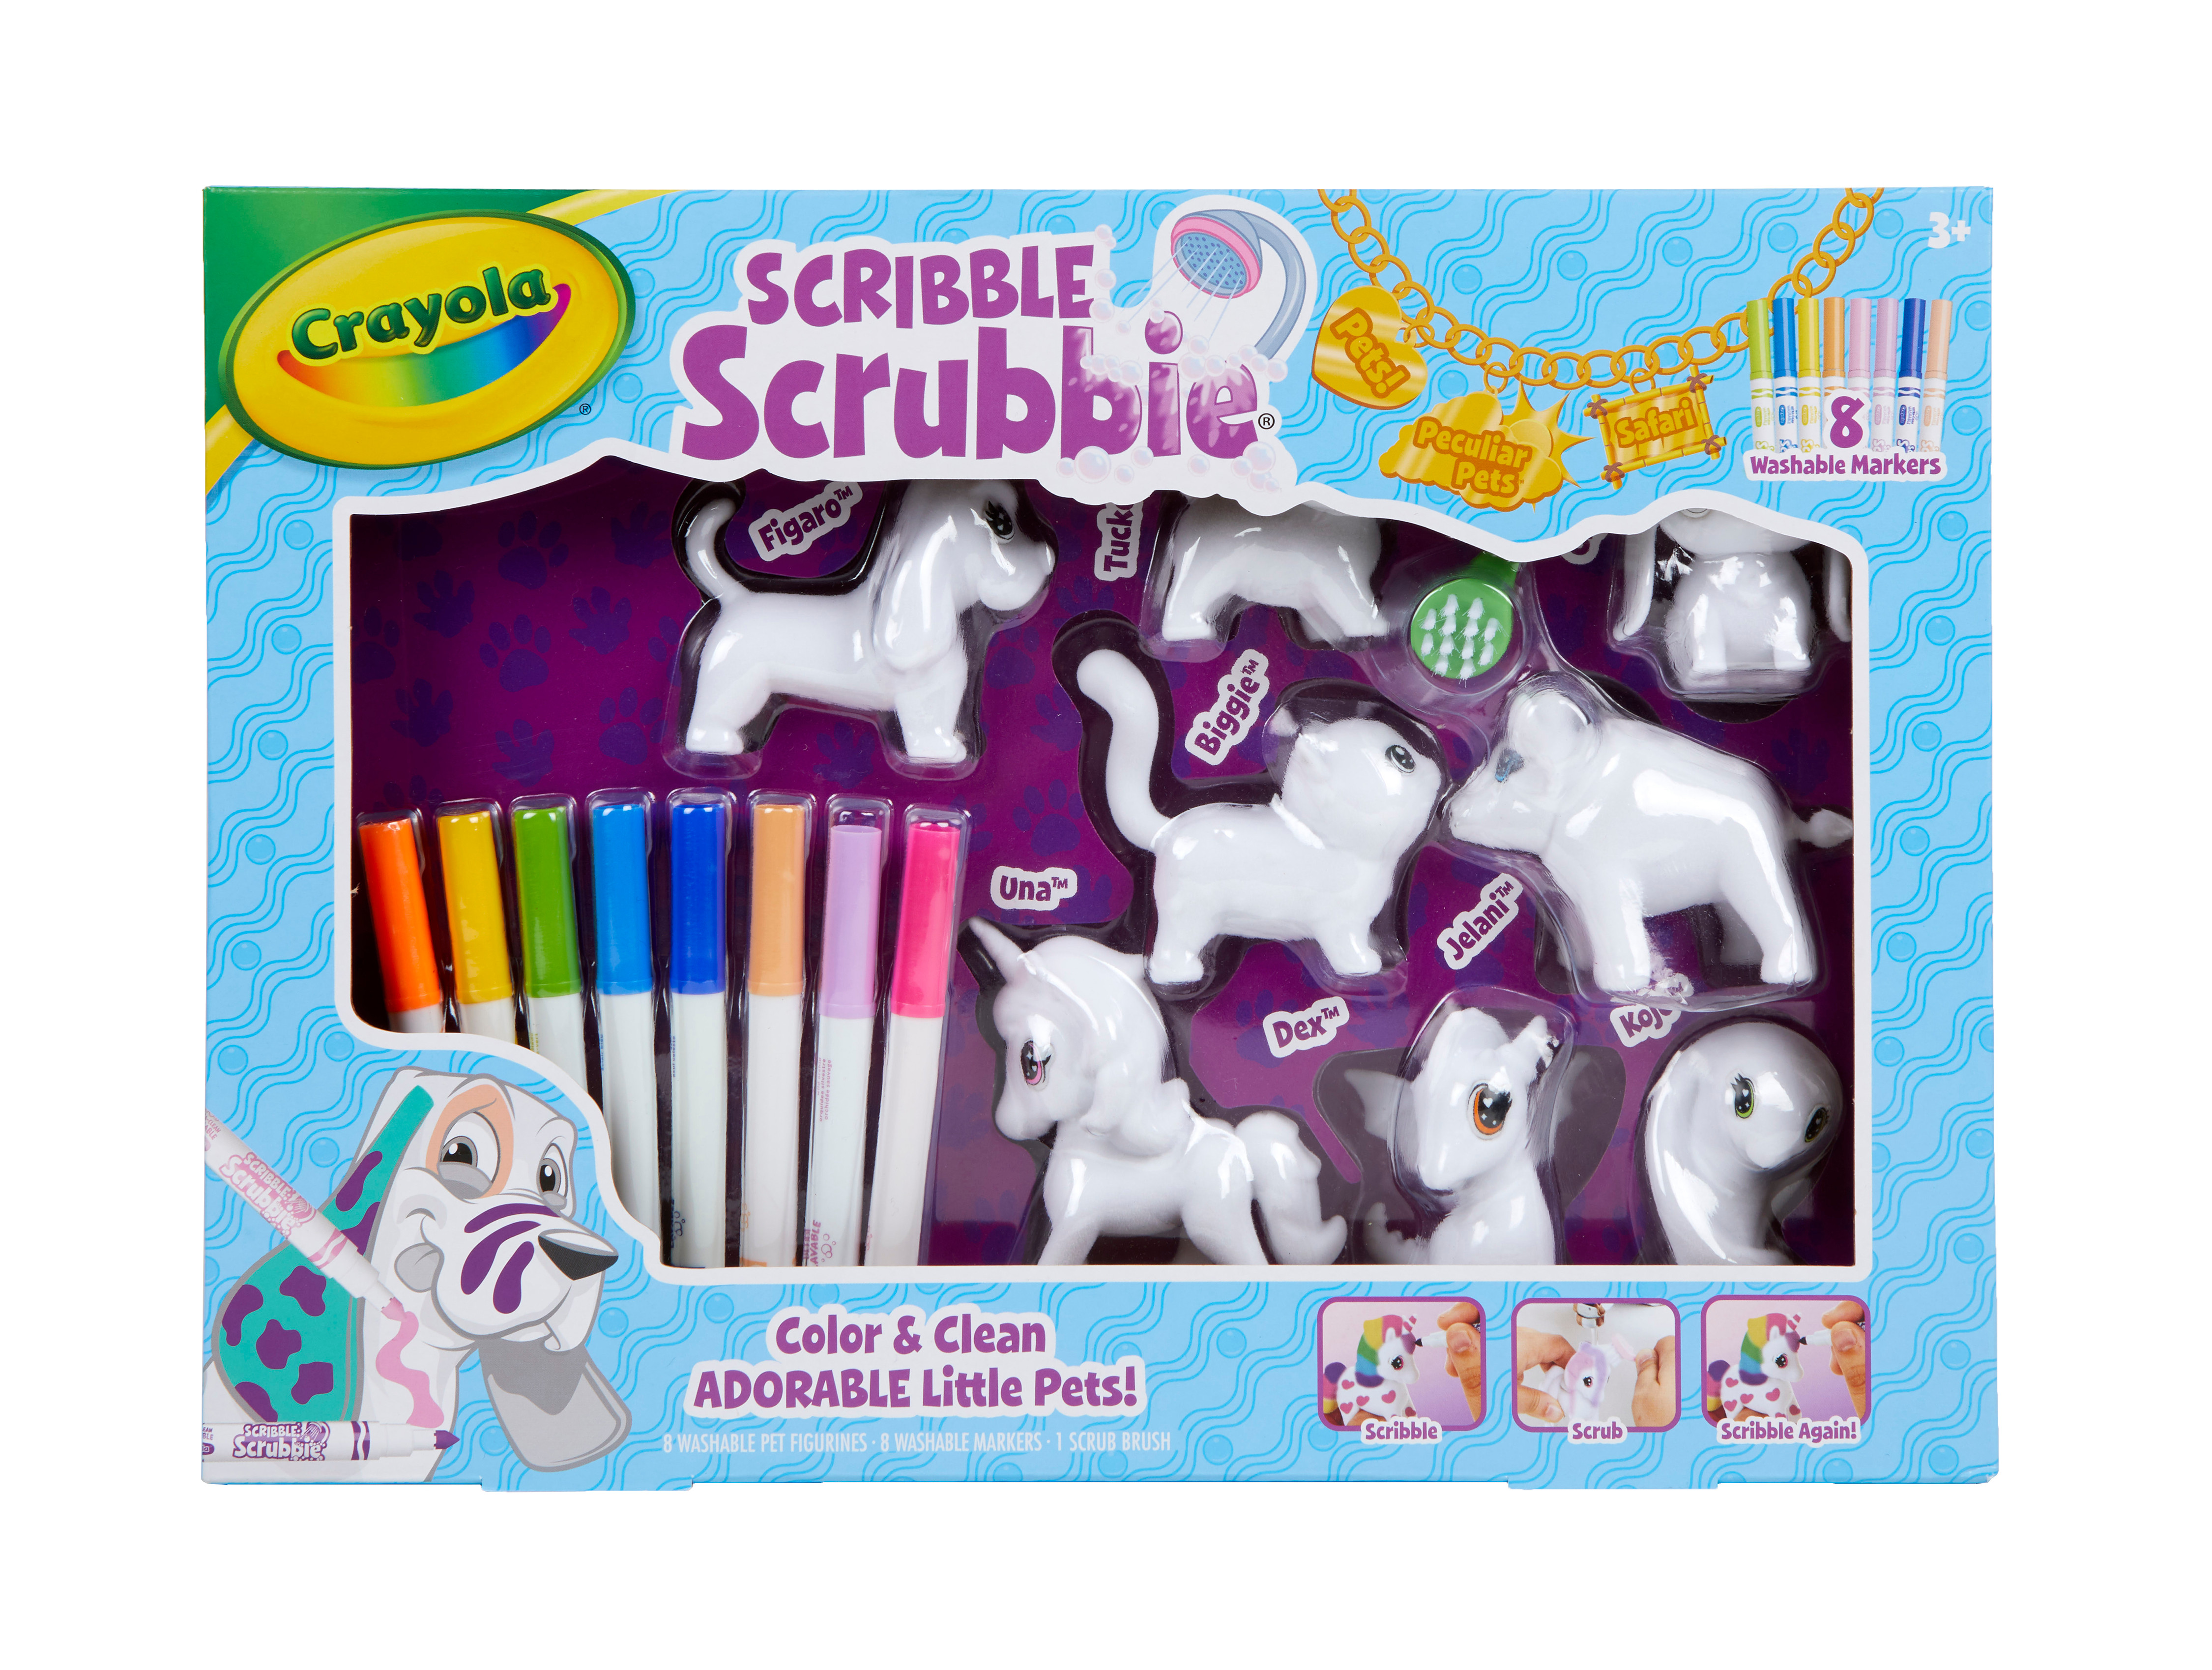 Crayola Scribble Scrubbie Pets, Coloring Toy Animal, Holiday Gift for Kids, Beginner Child - image 5 of 8